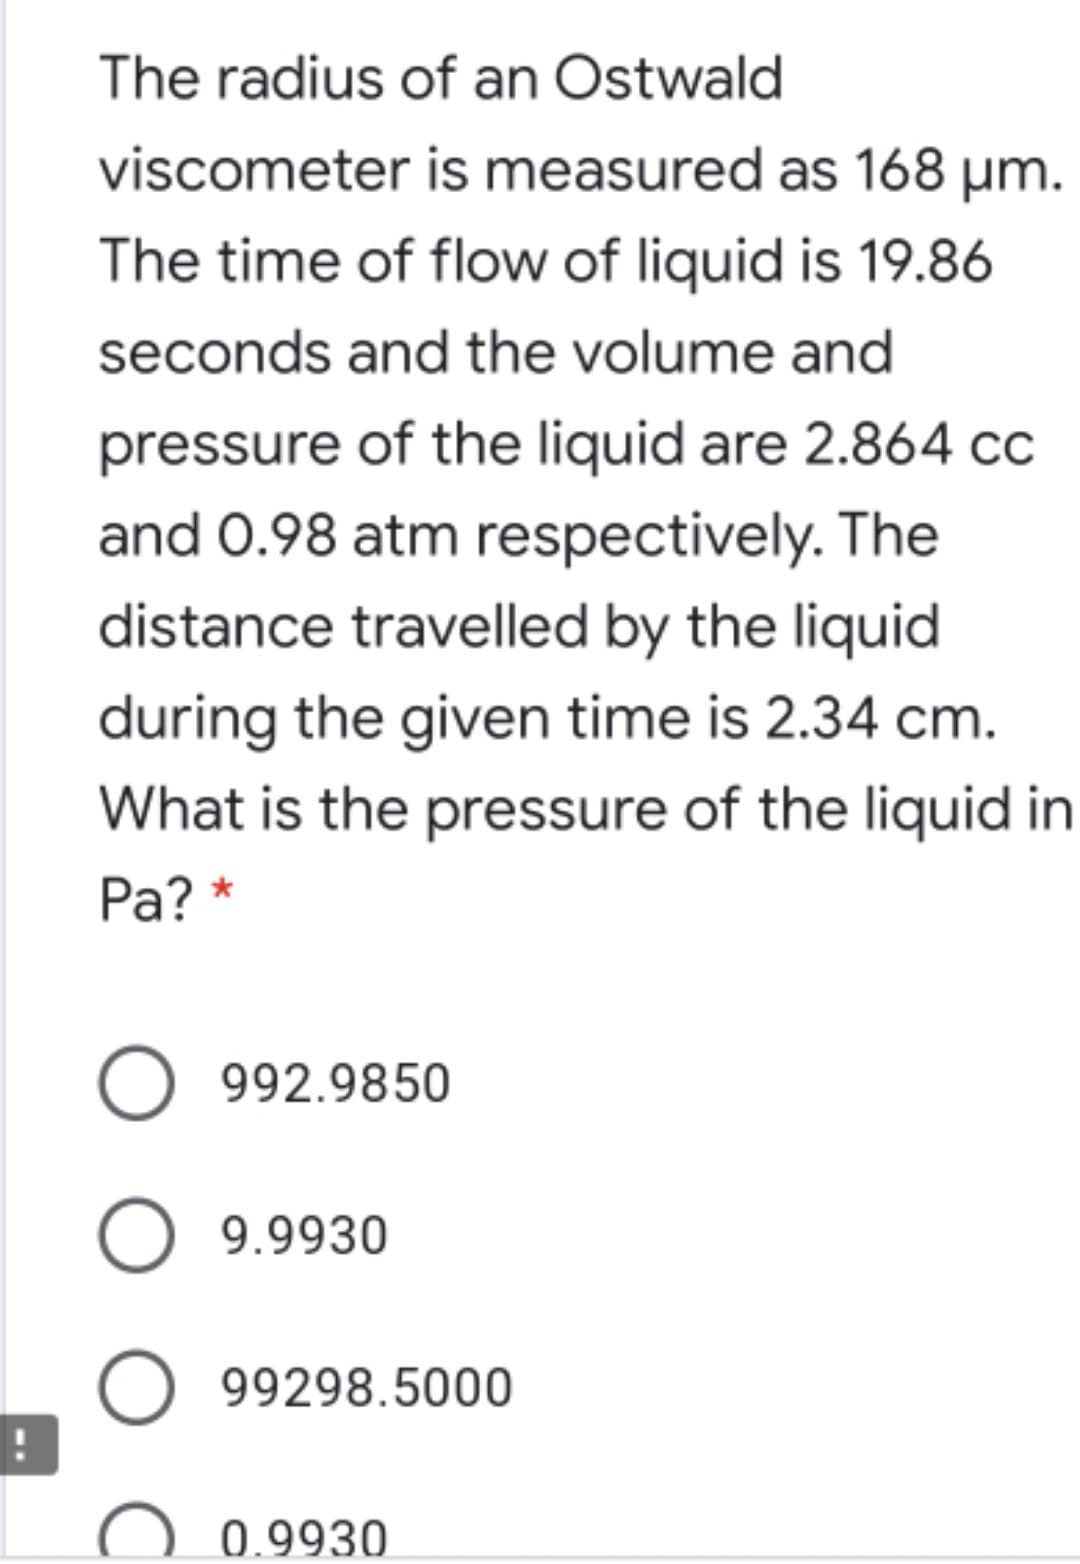 The radius of an Ostwald
viscometer is measured as 168 µm.
The time of flow of liquid is 19.86
seconds and the volume and
pressure of the liquid are 2.864 cc
and 0.98 atm respectively. The
distance travelled by the liquid
during the given time is 2.34 cm.
What is the pressure of the liquid in
Pa? *
O 992.9850
O 9.9930
99298.5000
0.9930
